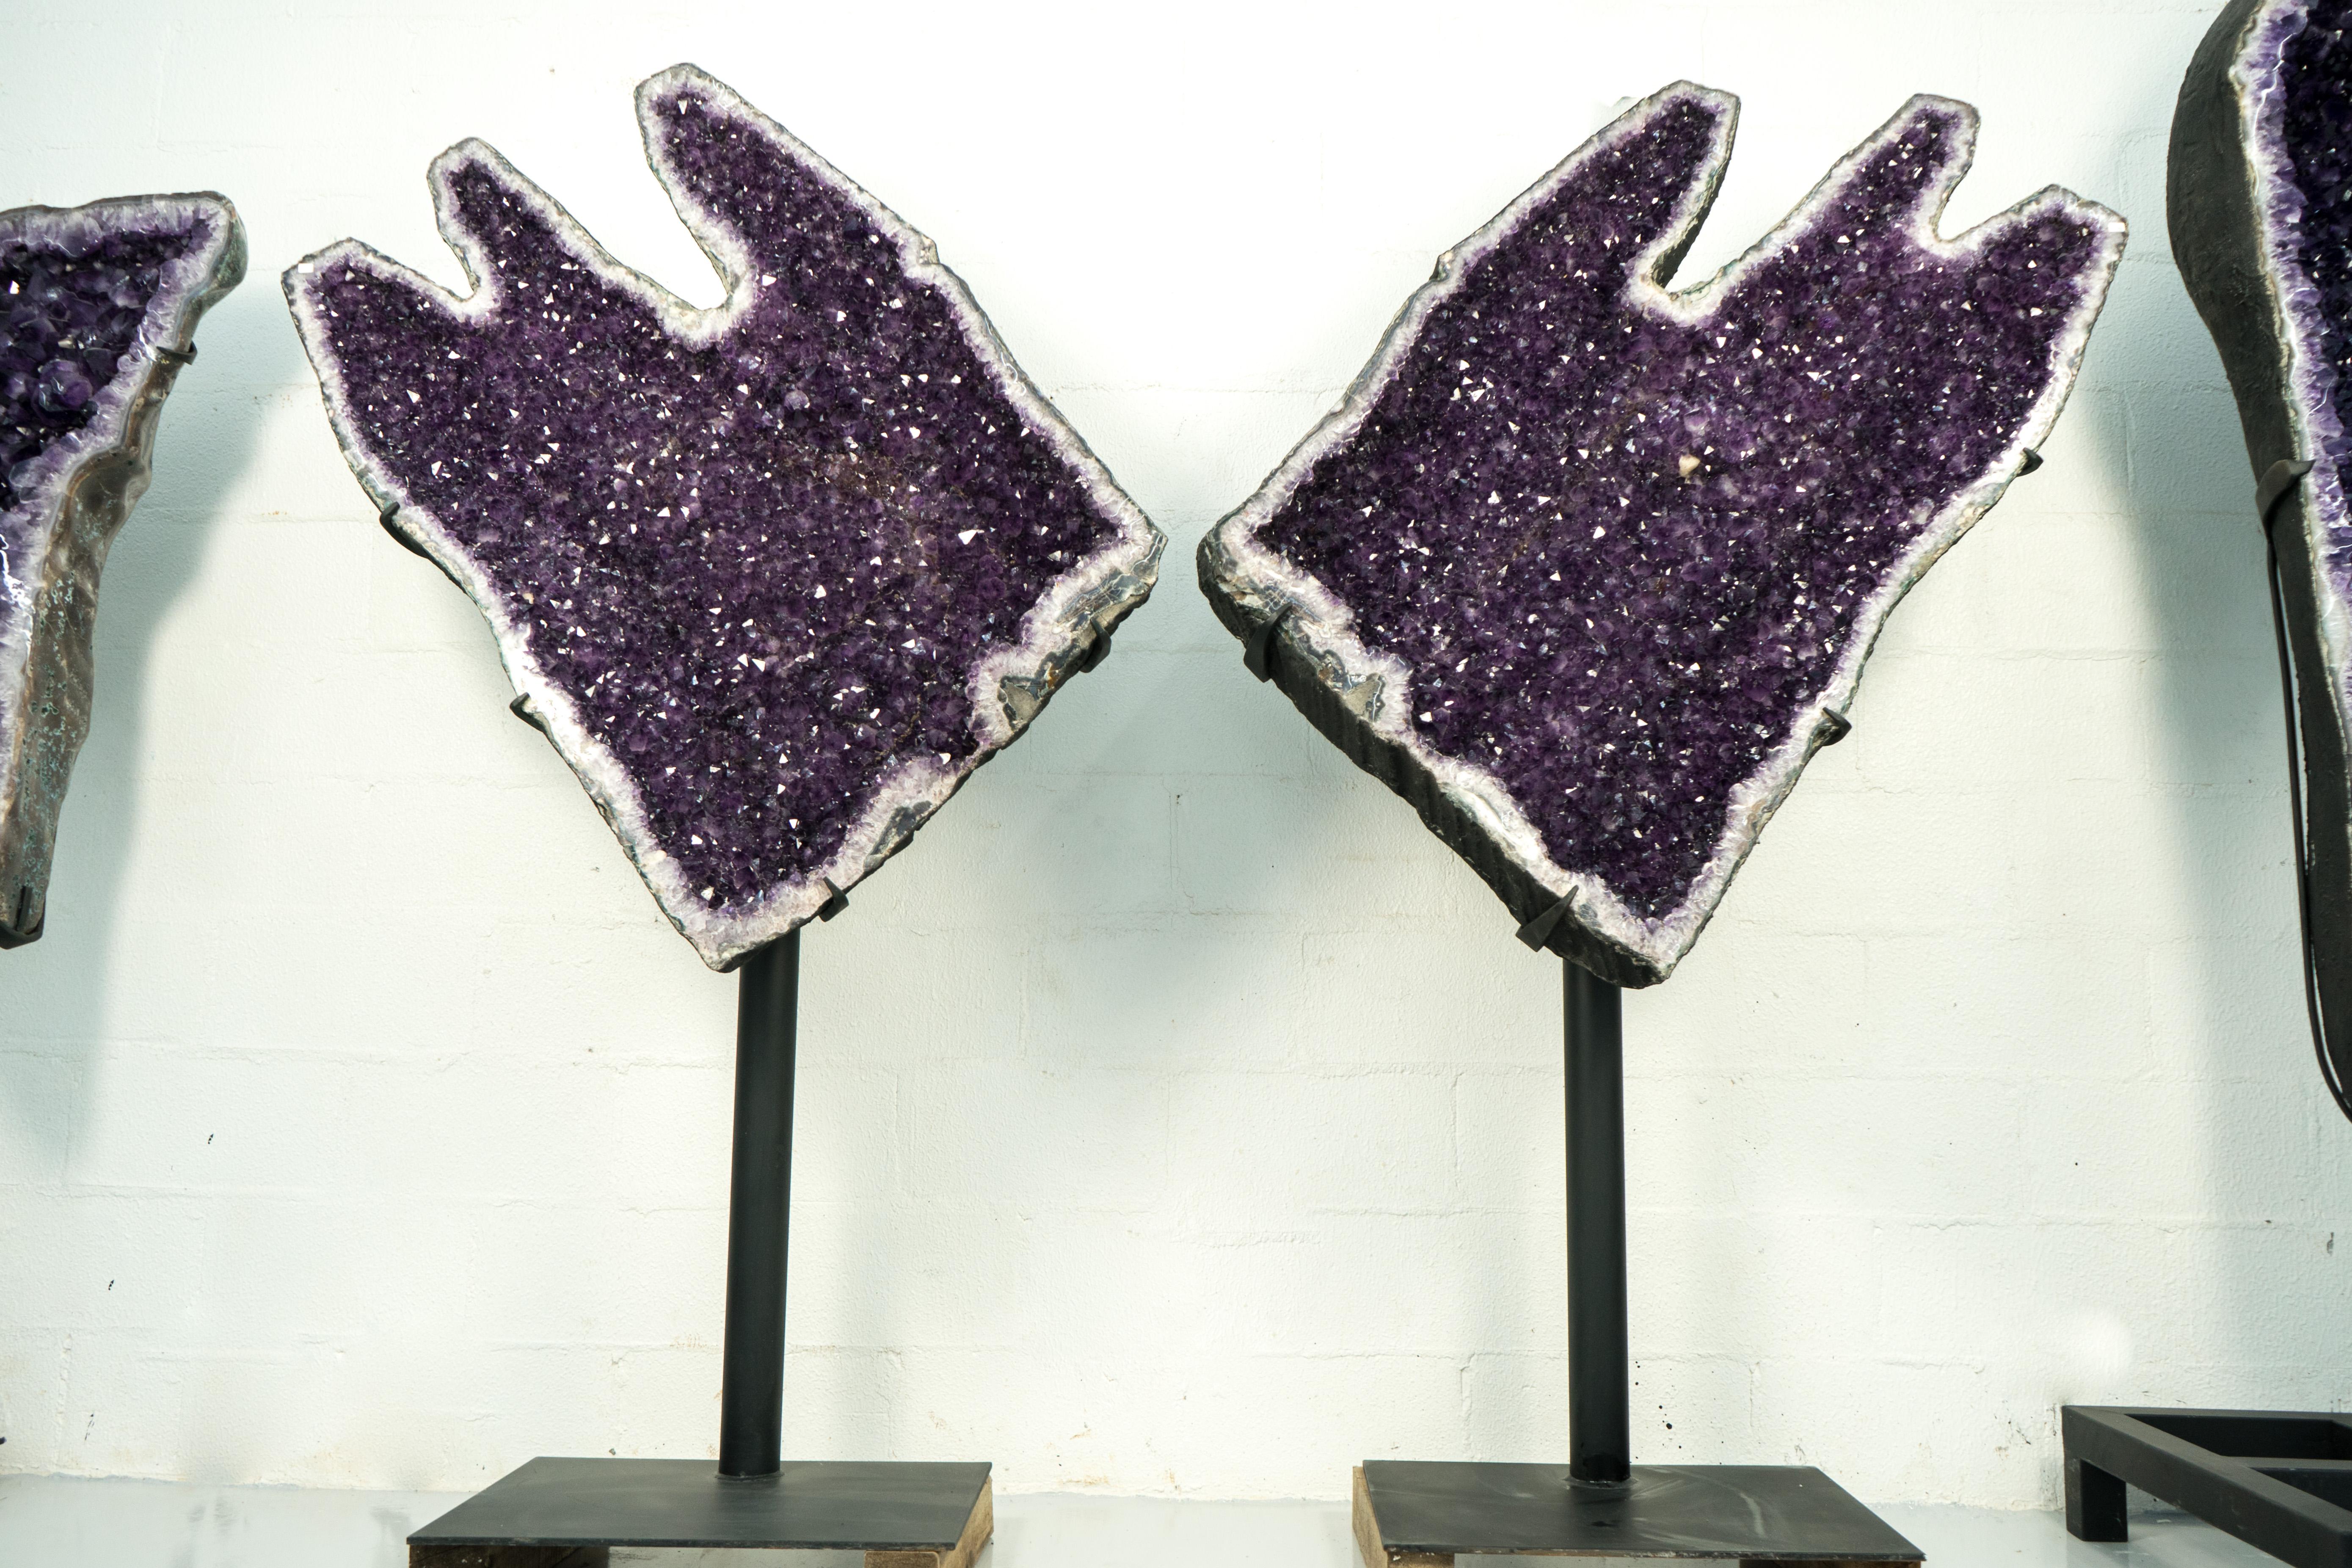 Sculptural 7 Ft Tall Giant Amethyst Geodes with High-Grade Deep Purple Amethyst For Sale 3